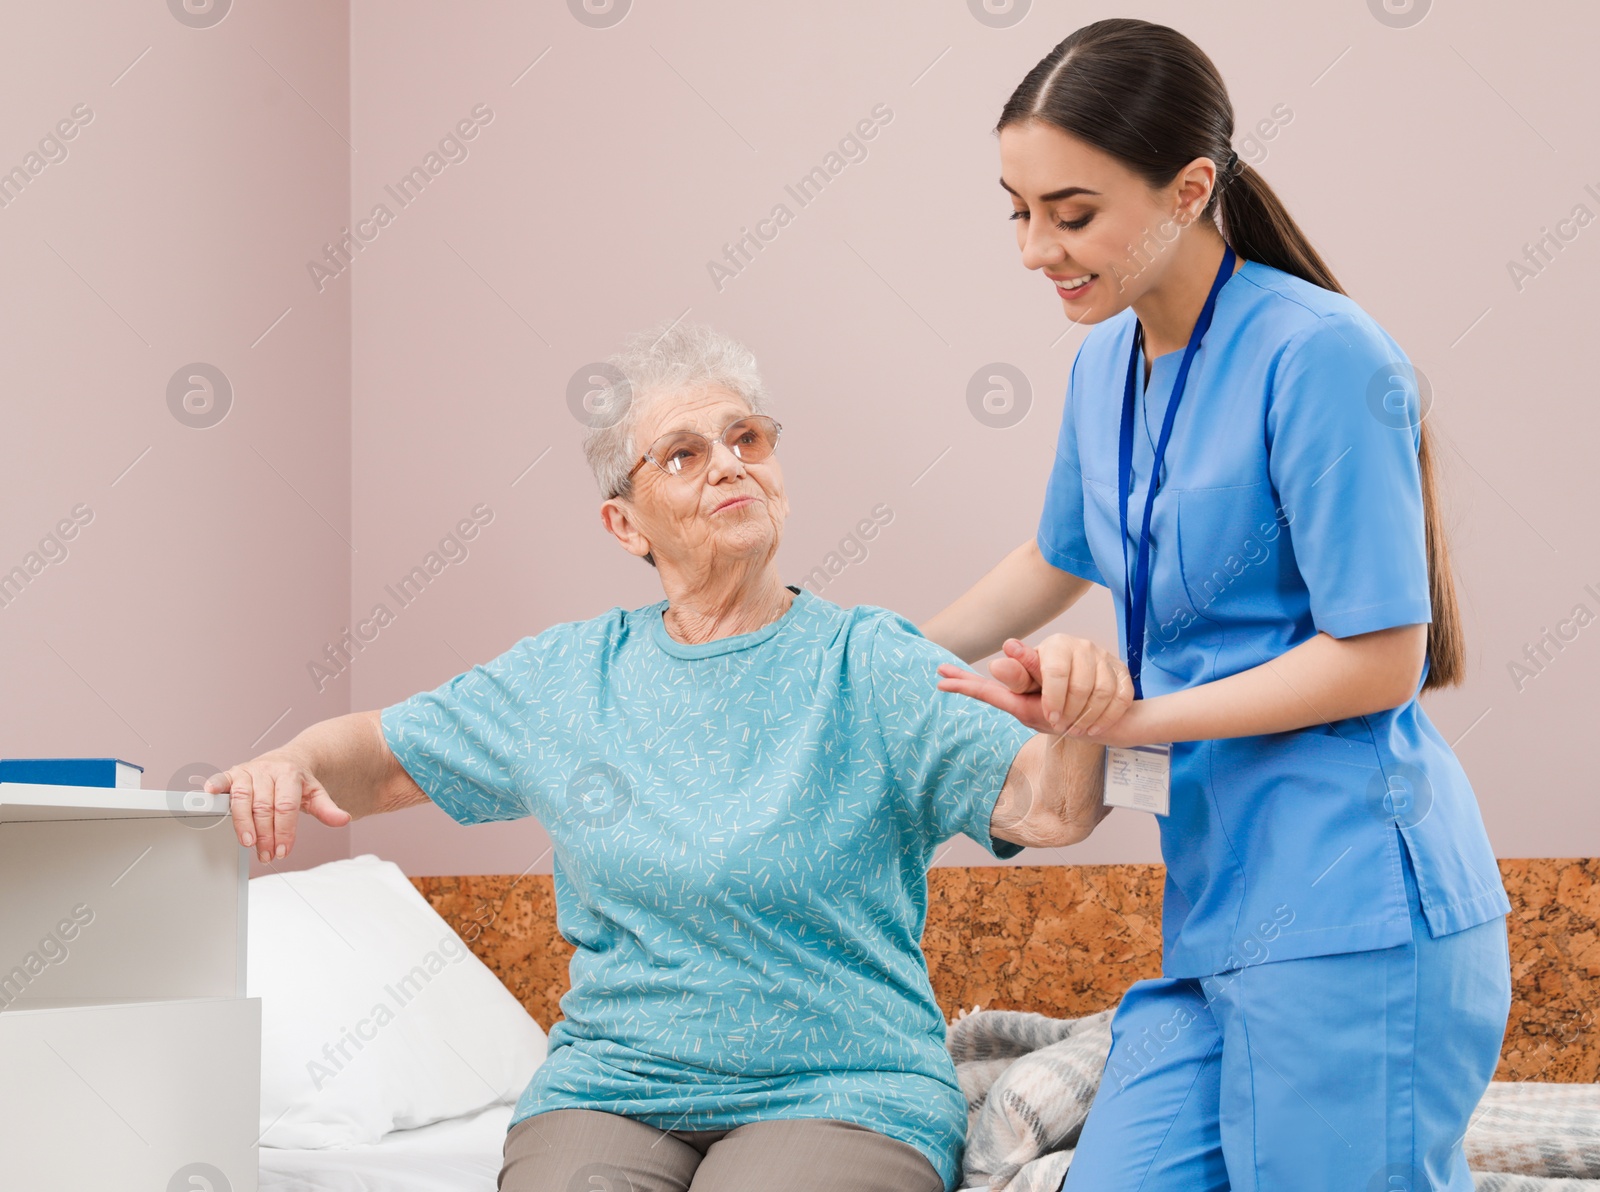 Photo of Nurse assisting senior woman on bed in hospital ward